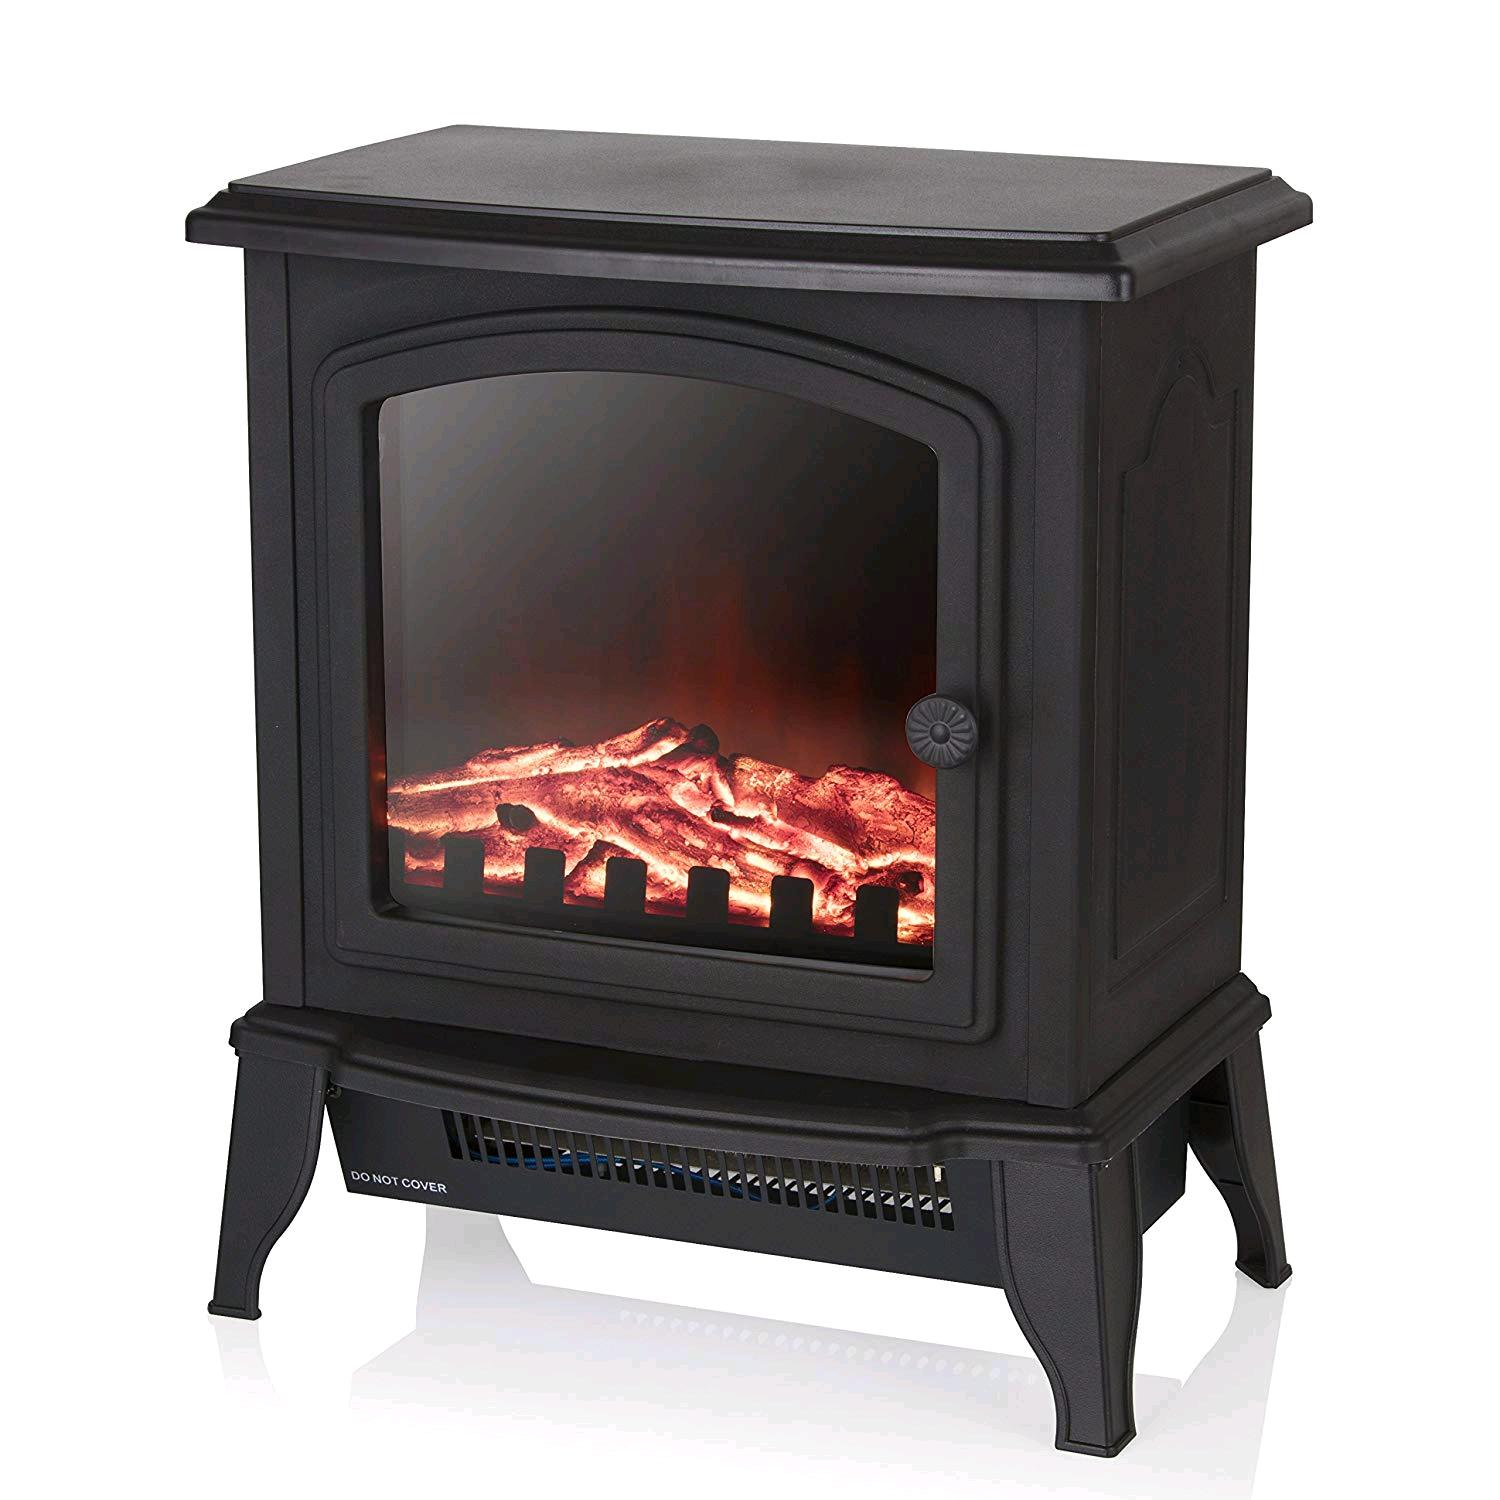 Warmlite WL46021 Mable Compact Stove Fire with Adjustable Thermostat Control, Realistic LED Flame Effect, 1000-2000 W